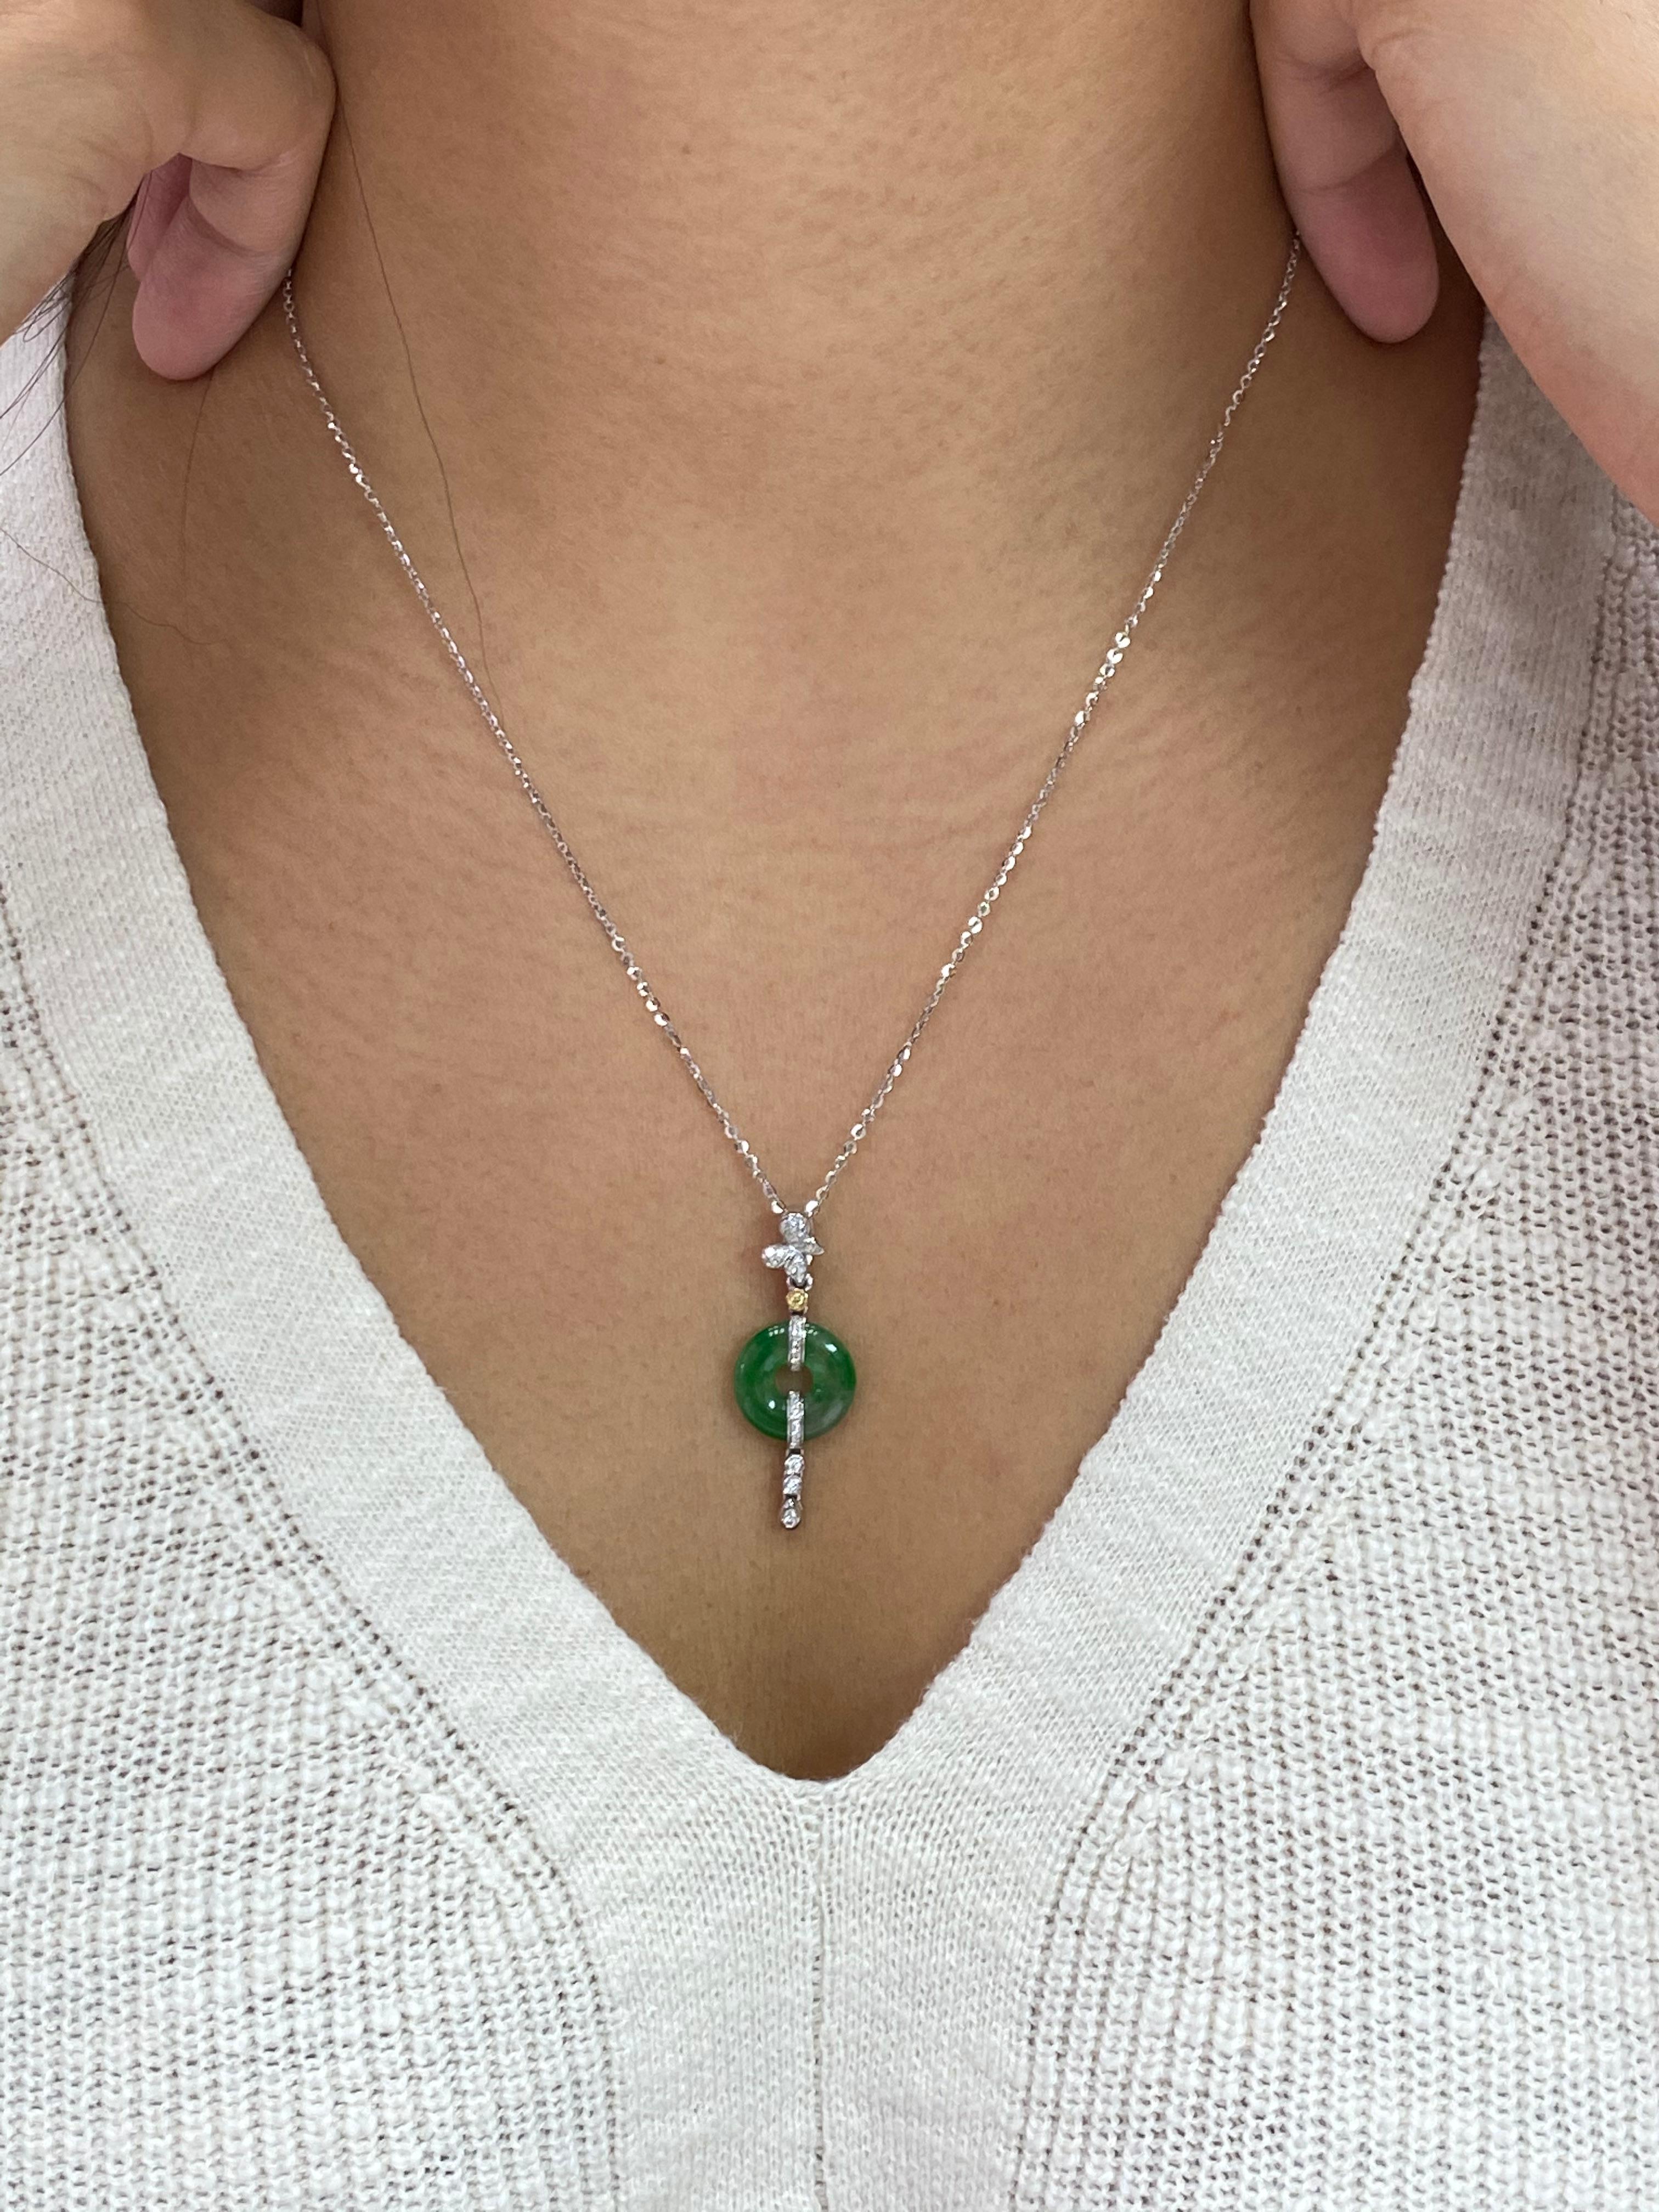 Here is a natural Jadeite Jade and diamond pendant with excellent apple green veins running through the whole piece. It is certified by 2 different labs. The pendant is set in 18k white gold and diamonds. There are diamonds totaling about 0.10 cts